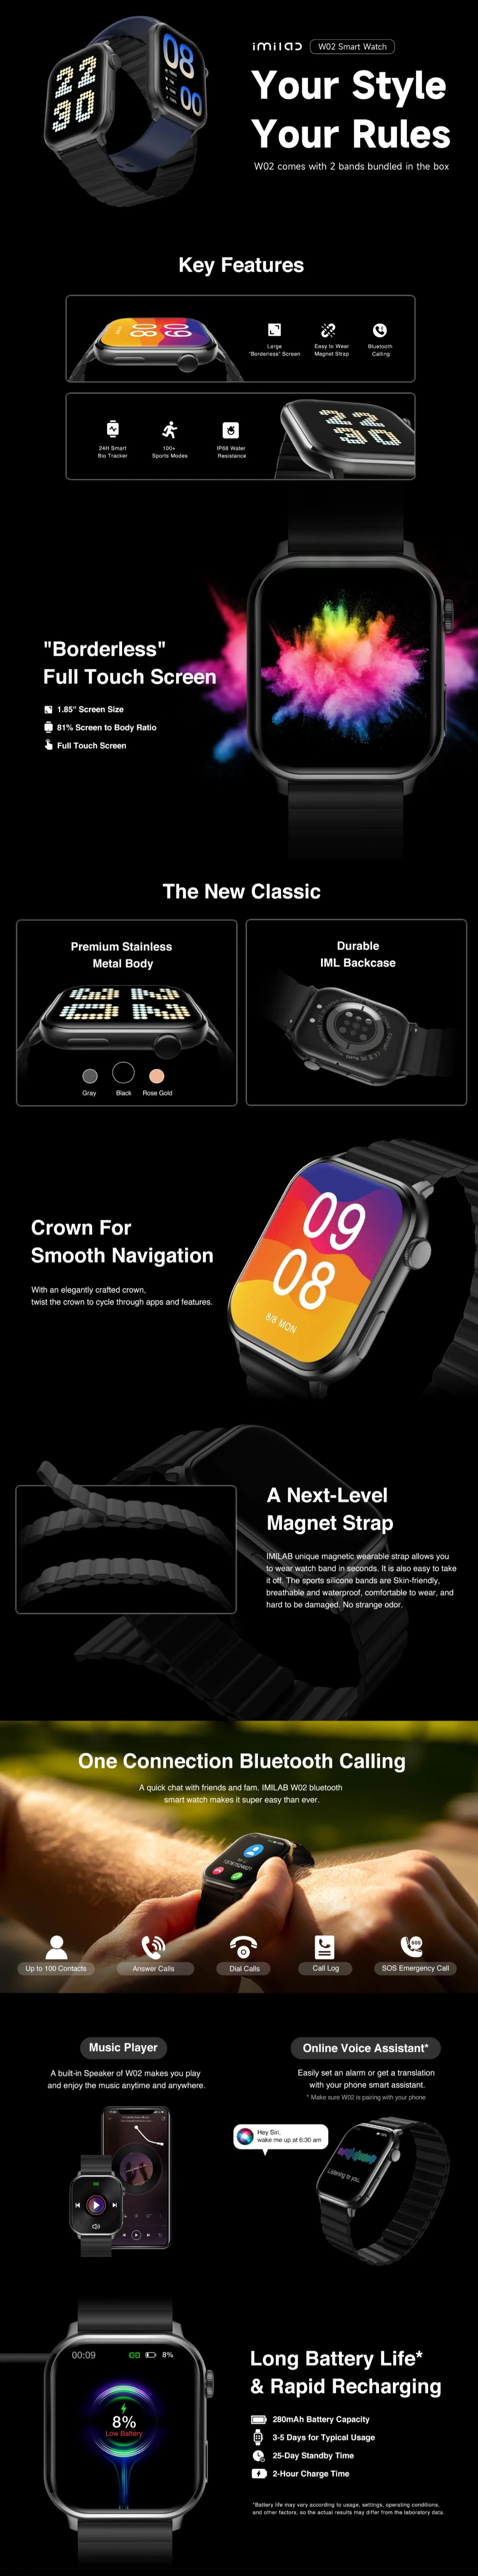 smart-watch-imilab-w02-features